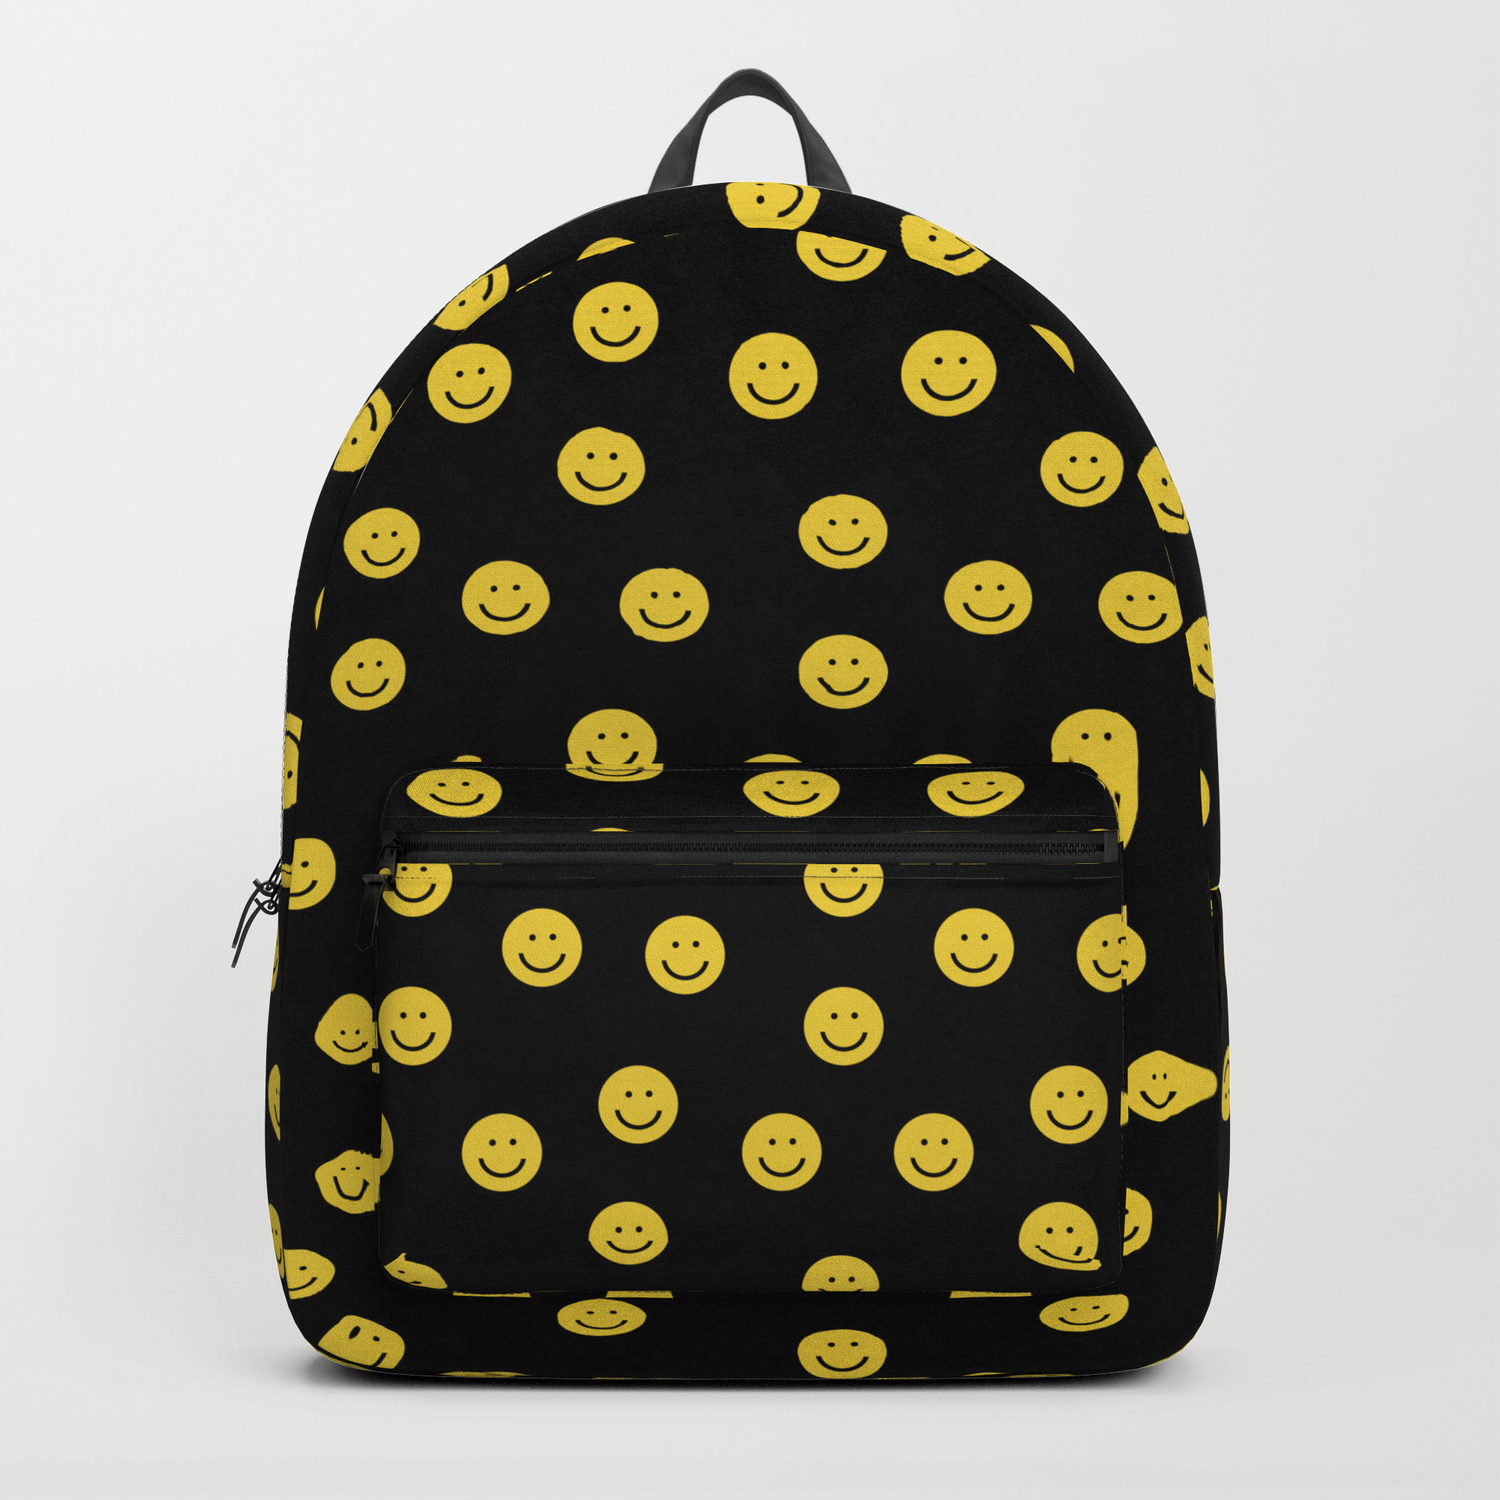 90s smiley face backpack